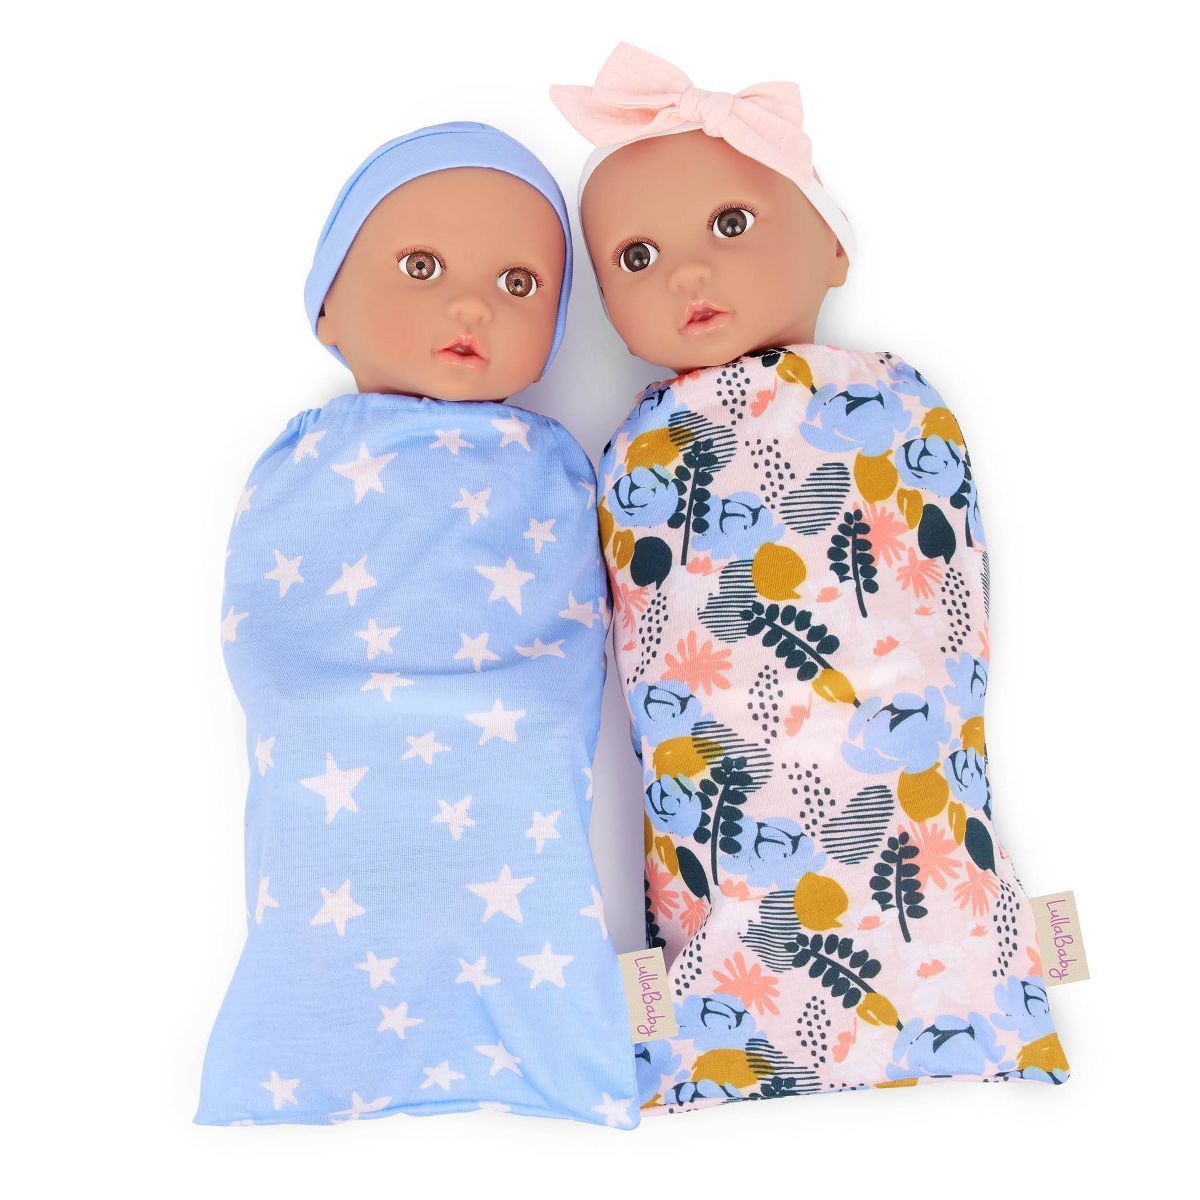 LullaBaby Twin Dolls Set With Floral And Star Sleep Sacks | Target